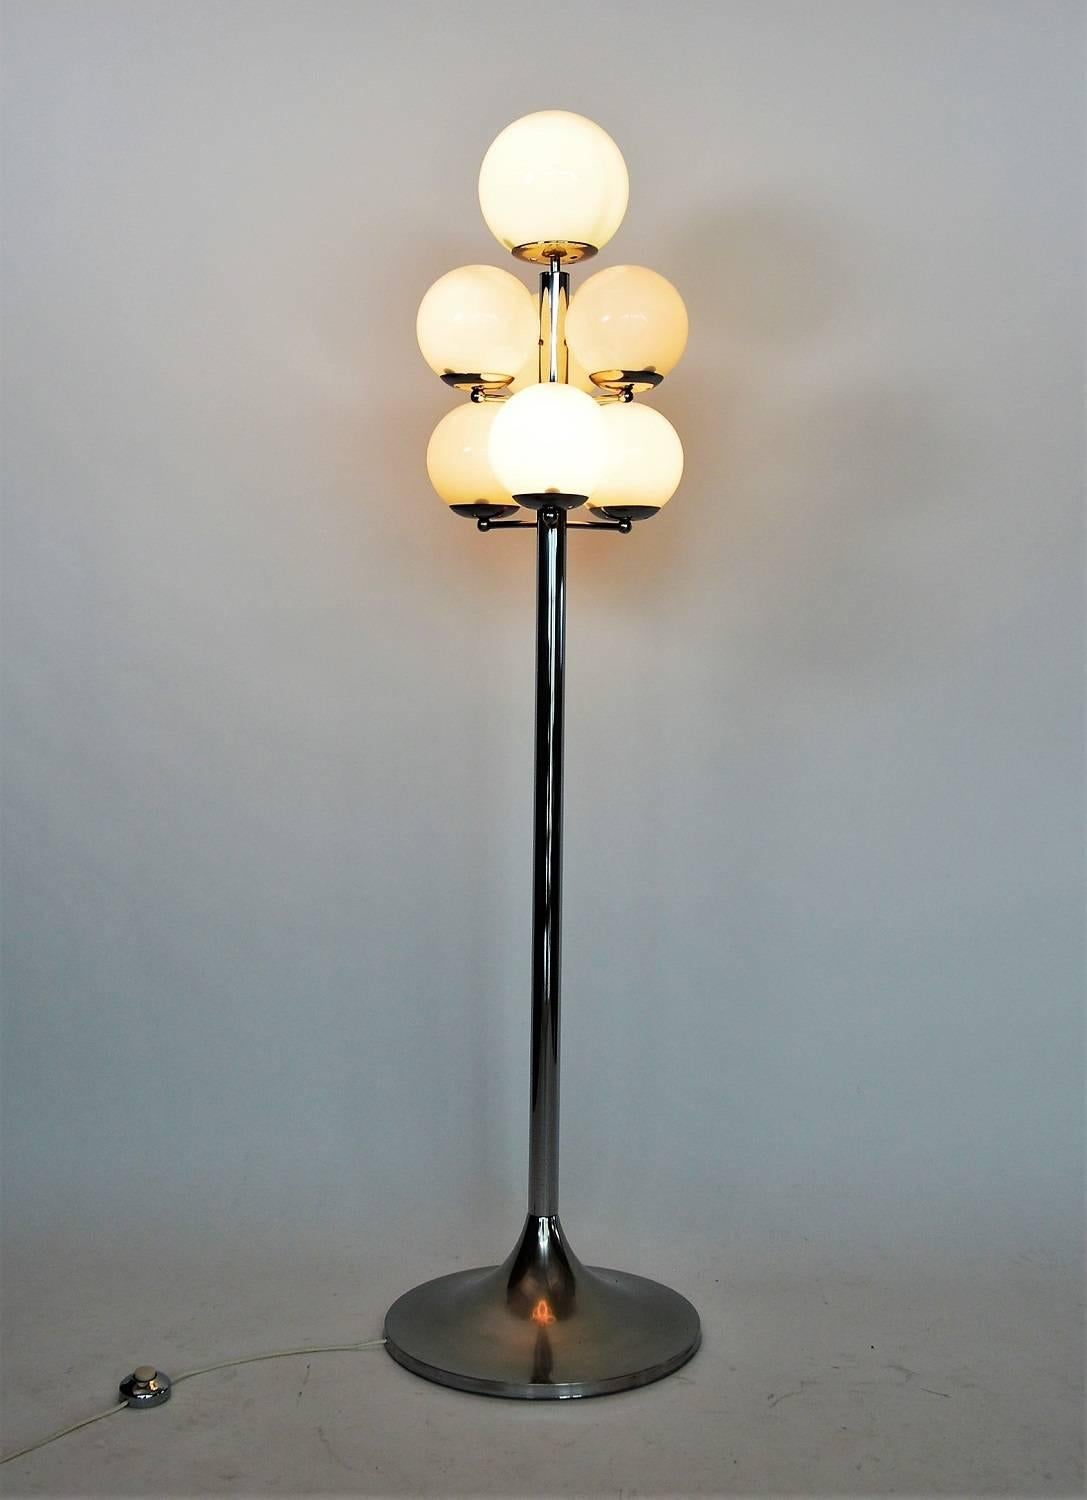 Amazing floor lamp with seven white glass globes.
Made in Italy in the 1970s.
The lamps tulip food is made of chromed metal with lot of patina and small spots.
The six small and one big glass globes are in excellent shape, no cracks.
The bigger